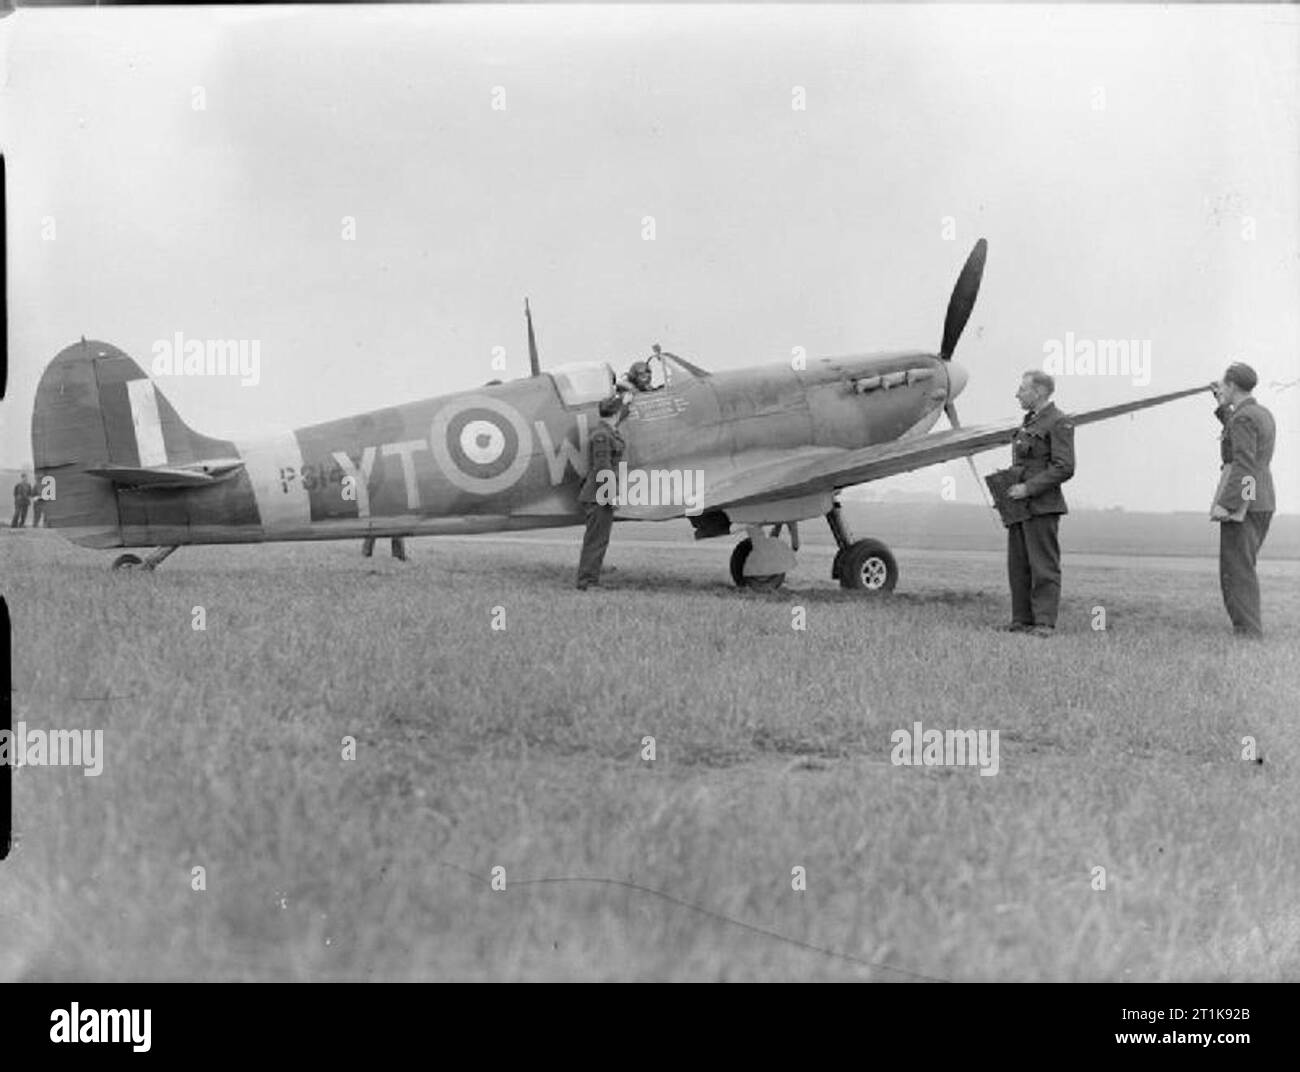 Royal Air Force Fighter Command, 1939-1945. Supermarine Spitfire Mark IIA, P8147 'YT-W' 'City of Norwich', of No. 65 Squadron RAF, attended by groundcrew prior to starting up at Kirton-in-Lindsey, Lincolnshire. After 65 Squadron, P8147 served with a number of units prior to being struck off charge in 1944; these included Nos. 306, 308 and 350 Squadrons, No. 52 Operational Training Unit, No. 5 (Pilots) Advanced Flying Unit, No. 57 Operational Training Unit and finally the Central Gunnery School. Stock Photo